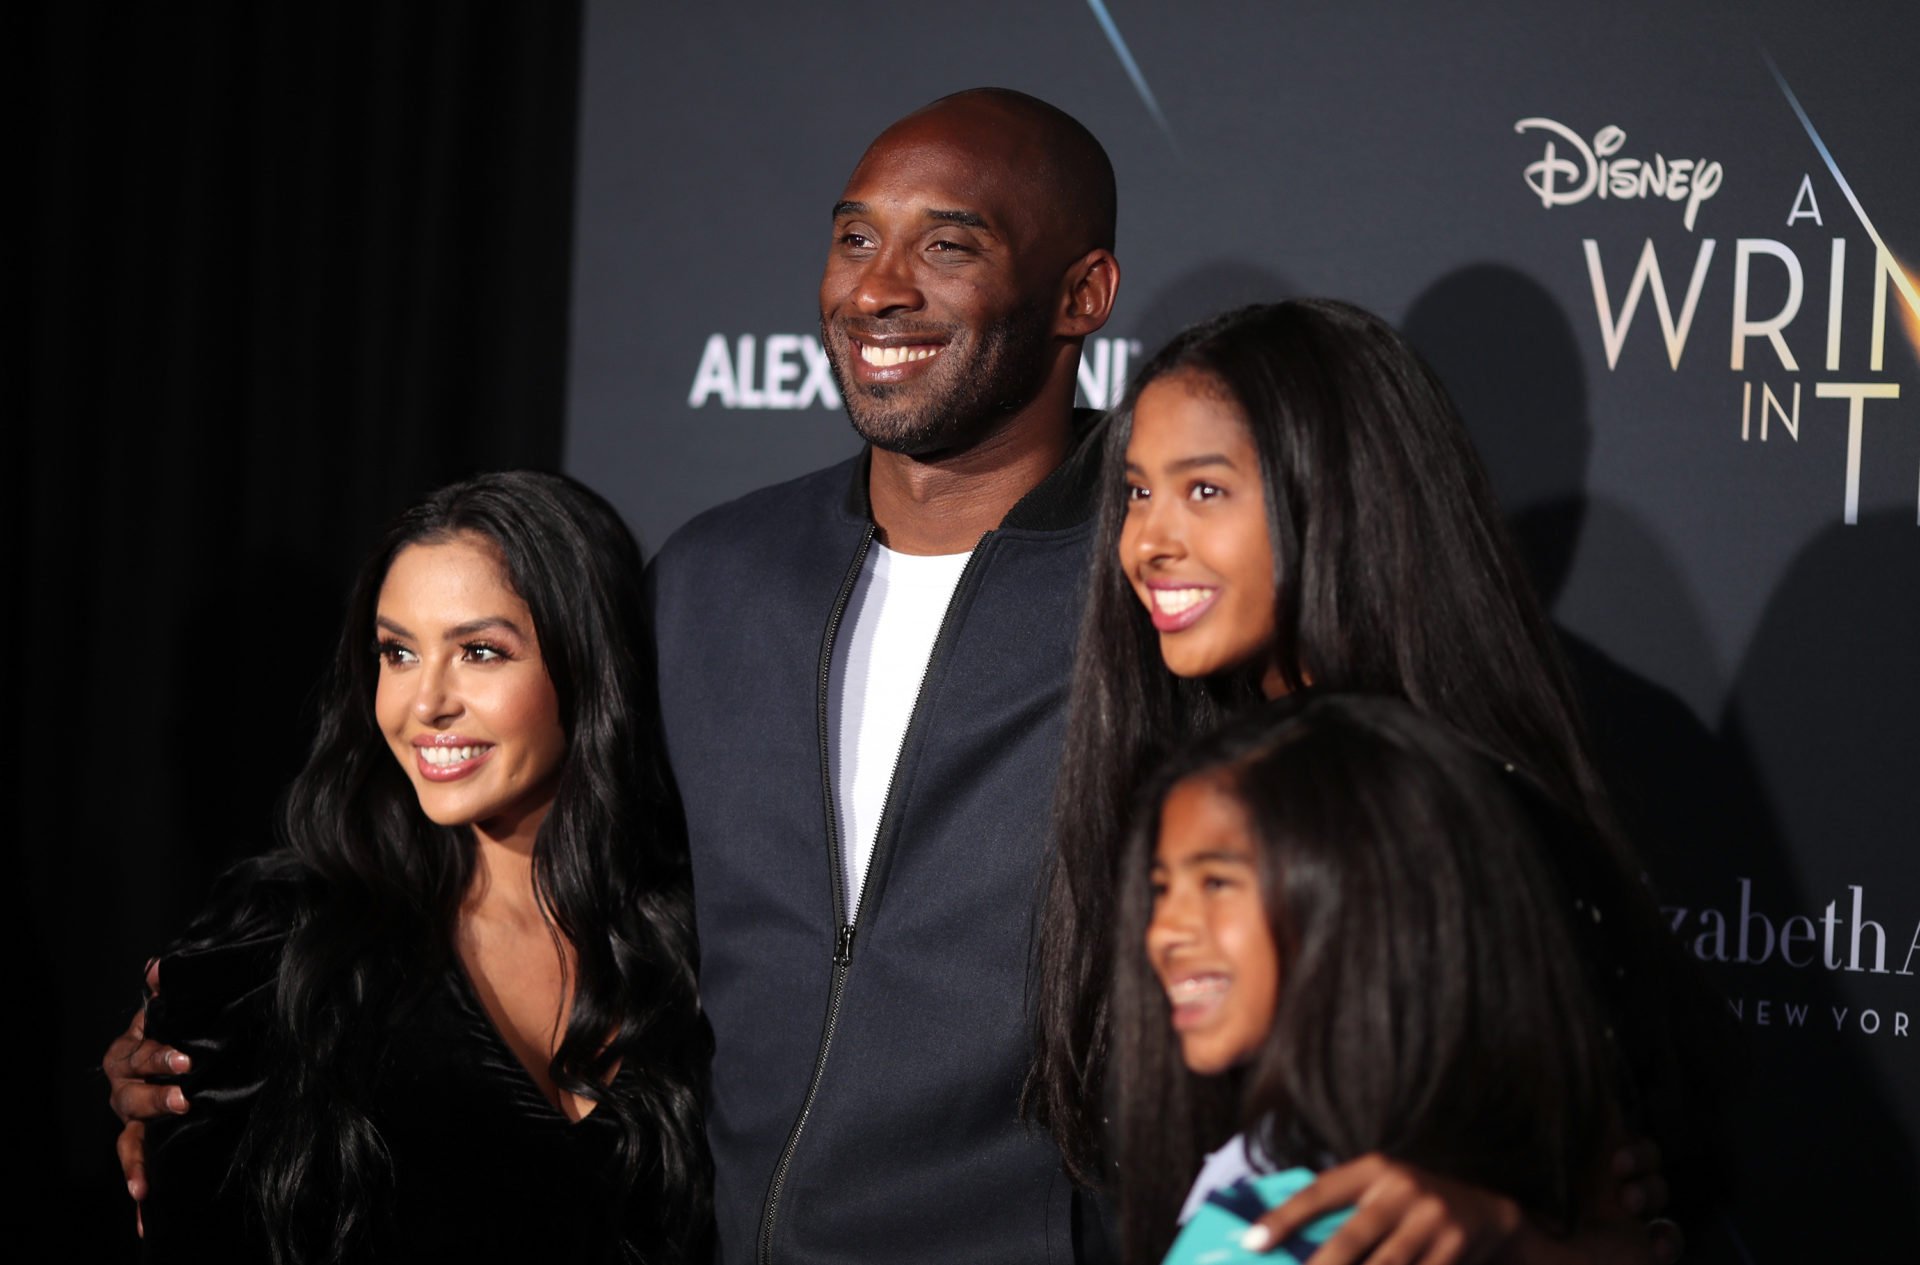 Kobe Bryant and his family attend the premiere of Disney's "A Wrinkle In Time" at the El Capitan Theatre on February 26, 2018 in Los Angeles, California.  